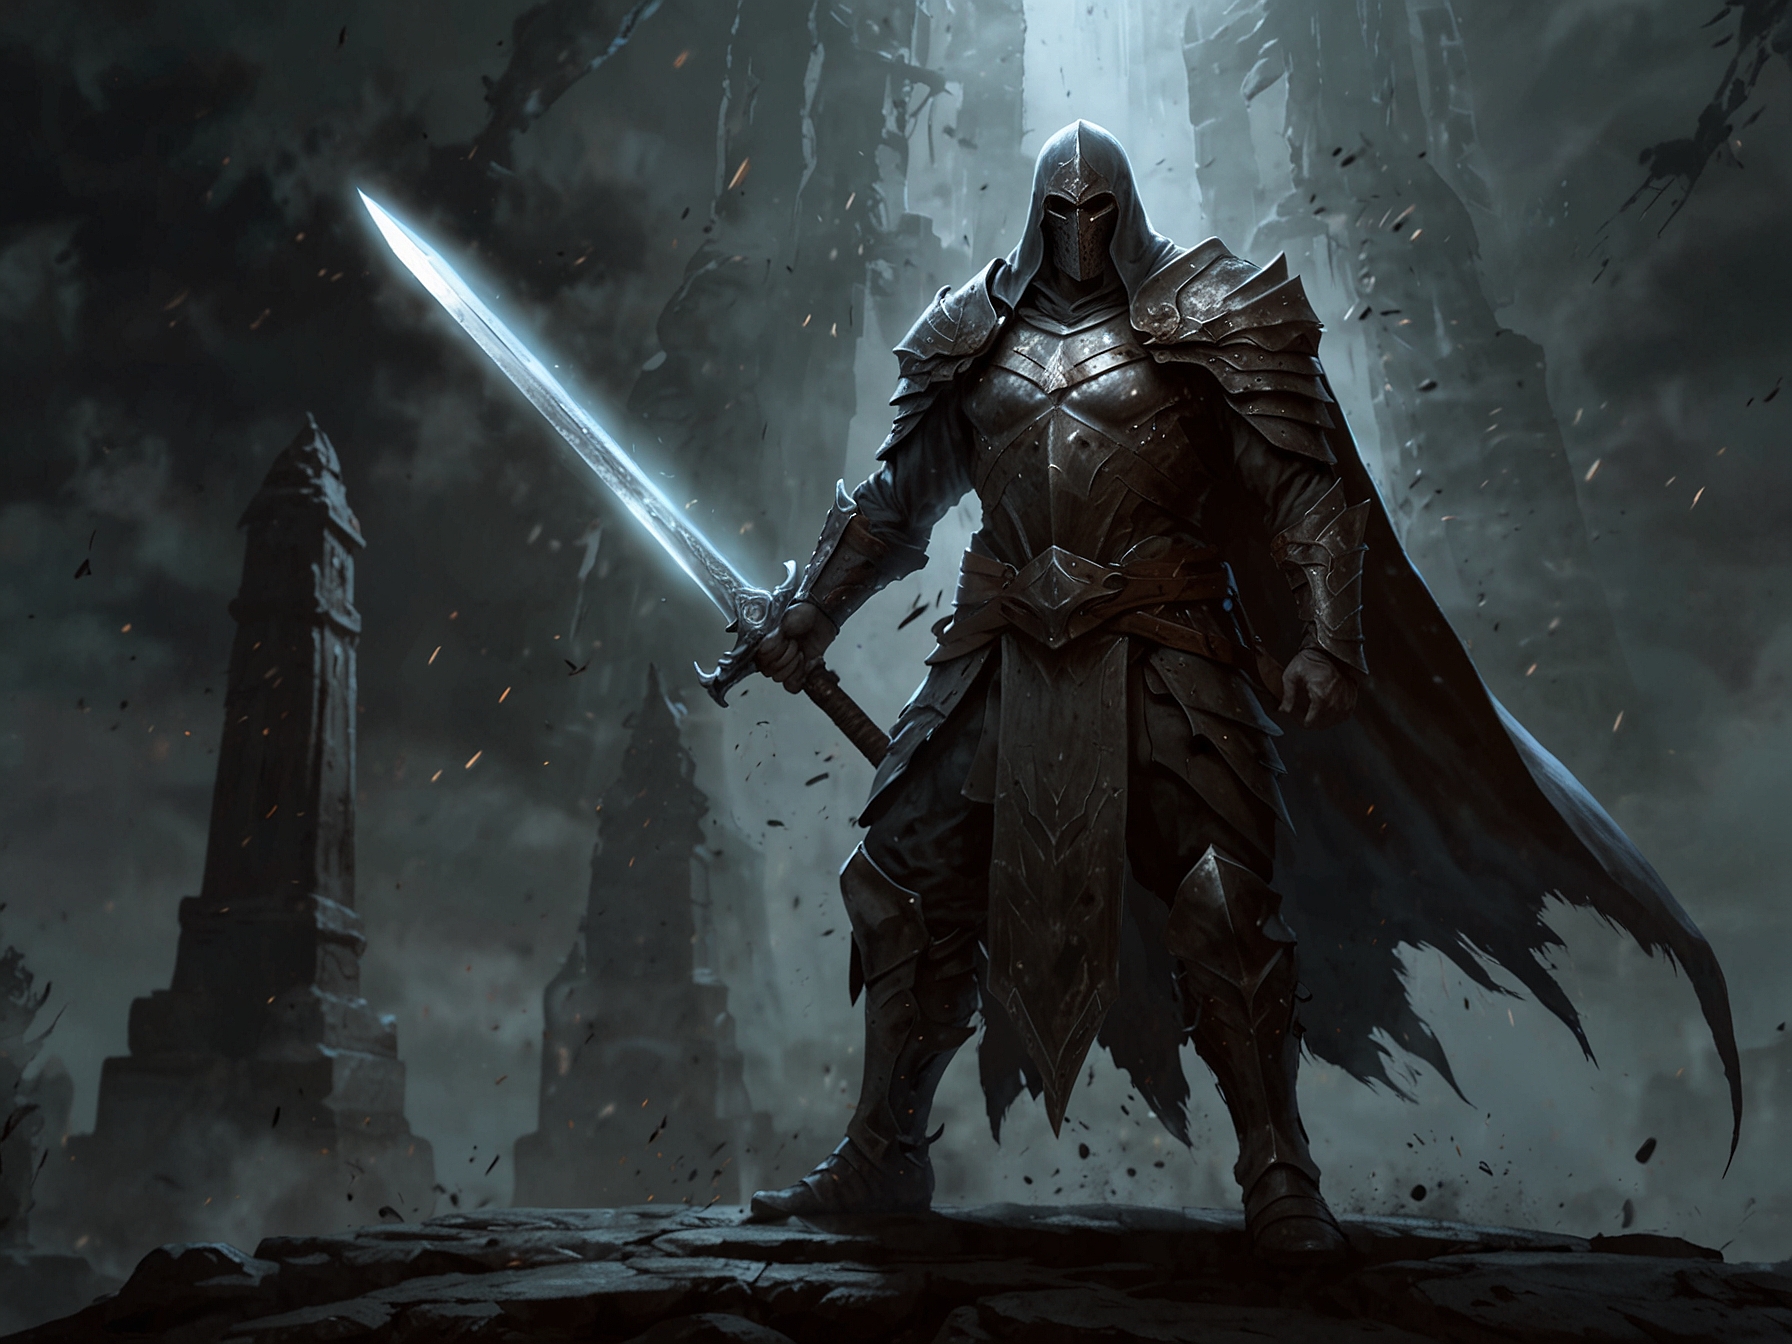 An Elden Ring character wielding a massive greatsword in a two-handed stance, ready to unleash a formidable attack on approaching enemies, illustrating the powerful combat mechanics.